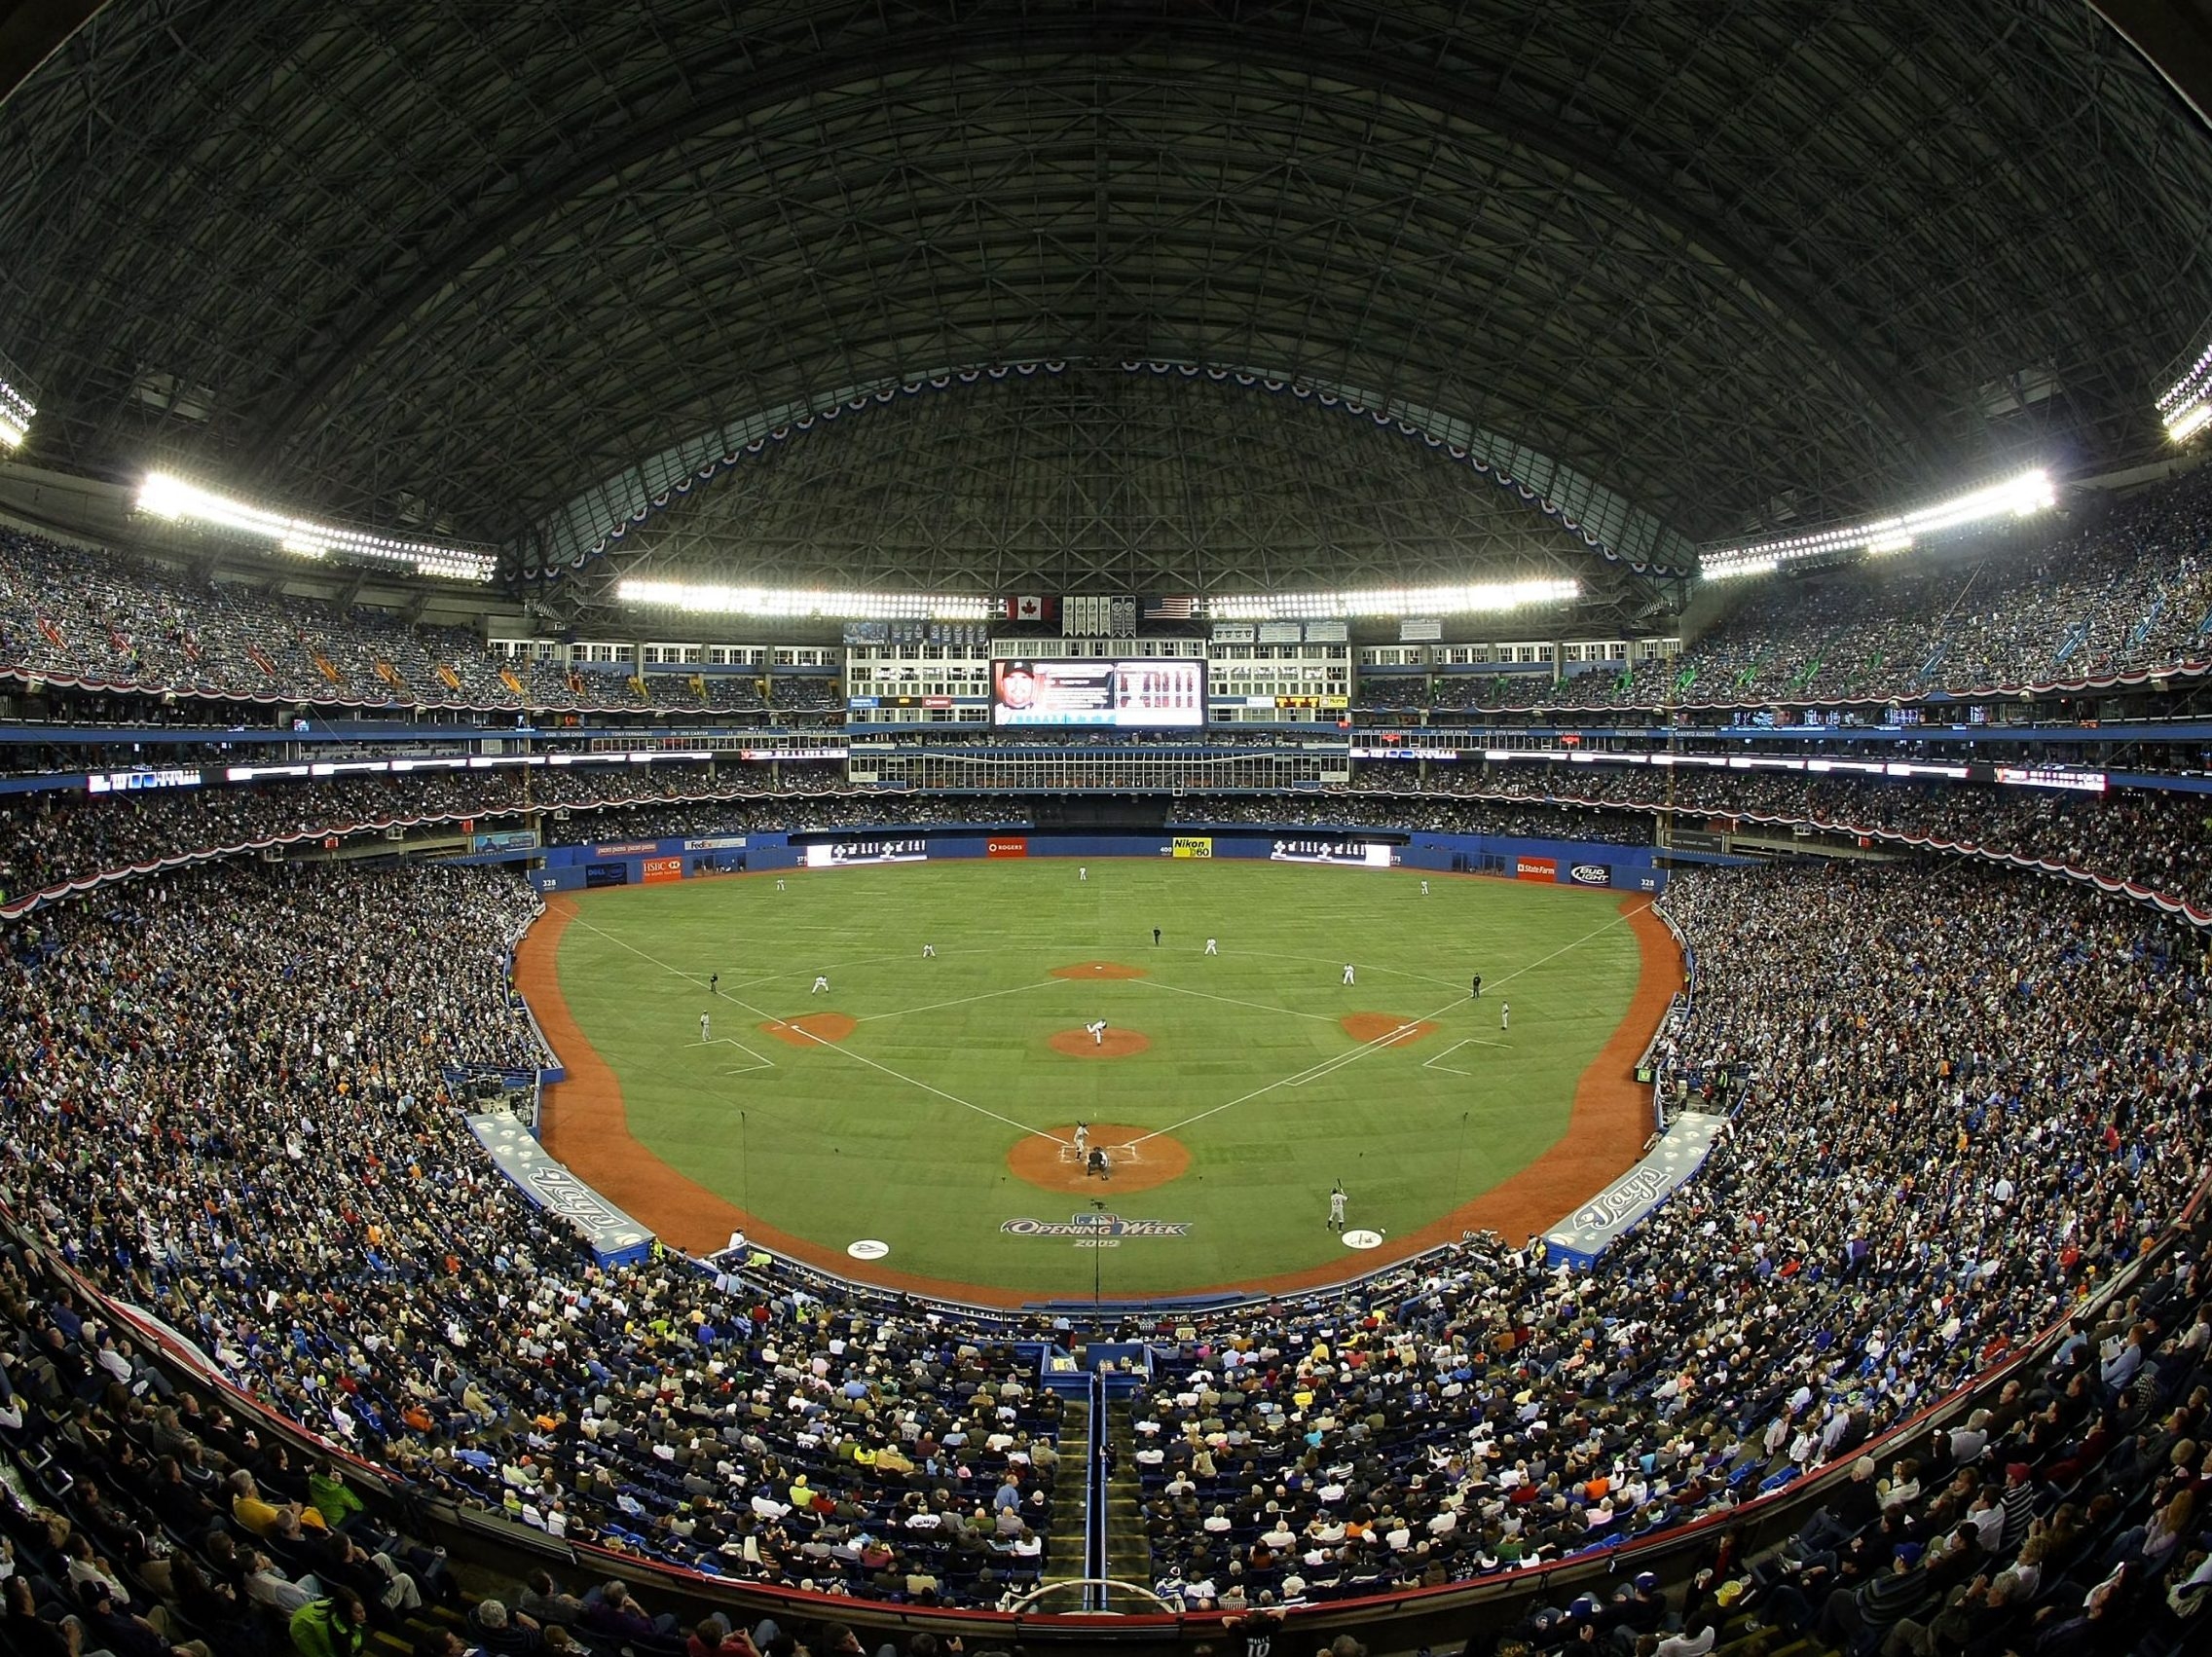 DIRTY DOME: Rogers Centre among dirtiest in North America, says